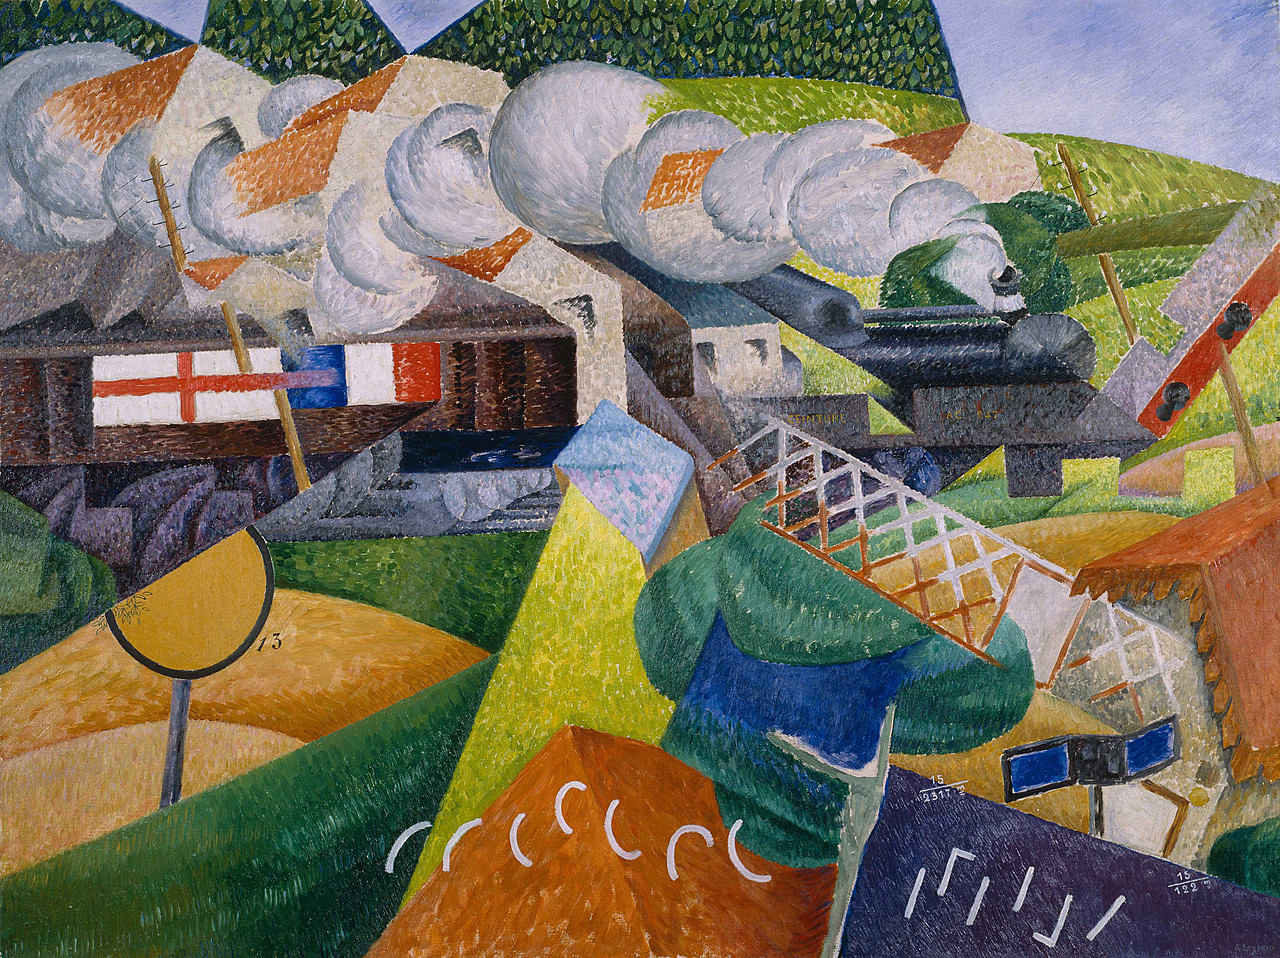 Red Cross Train Passing a Village | The Guggenheim Museums and Foundation